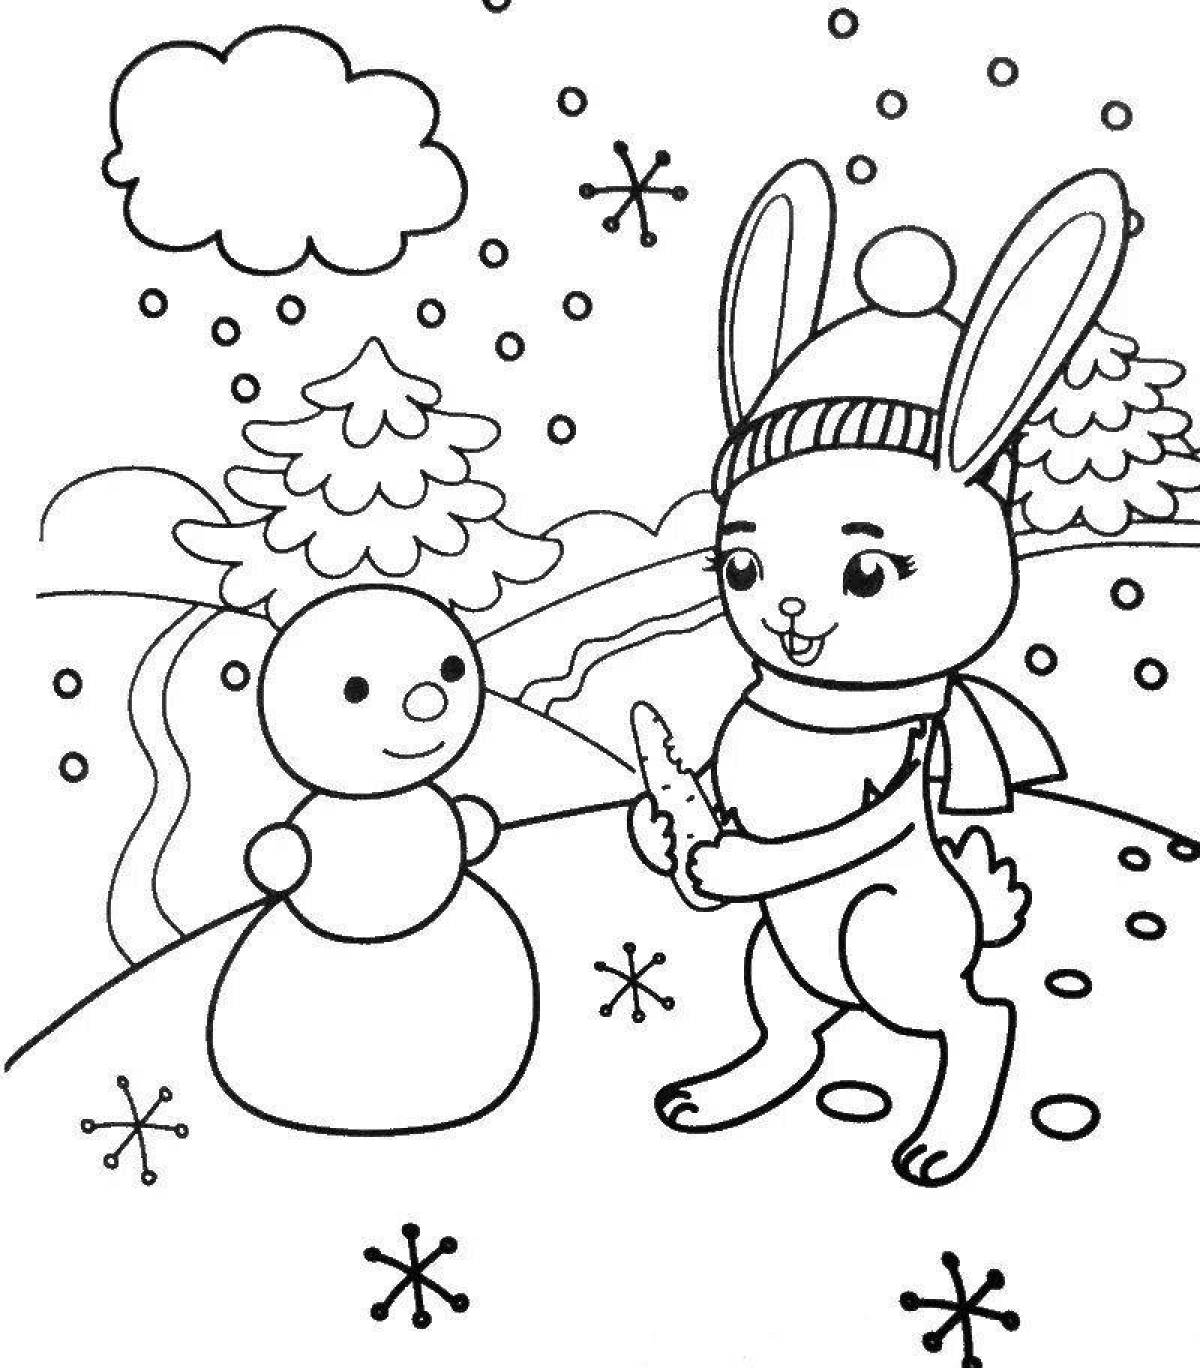 Bunny and snowman #1